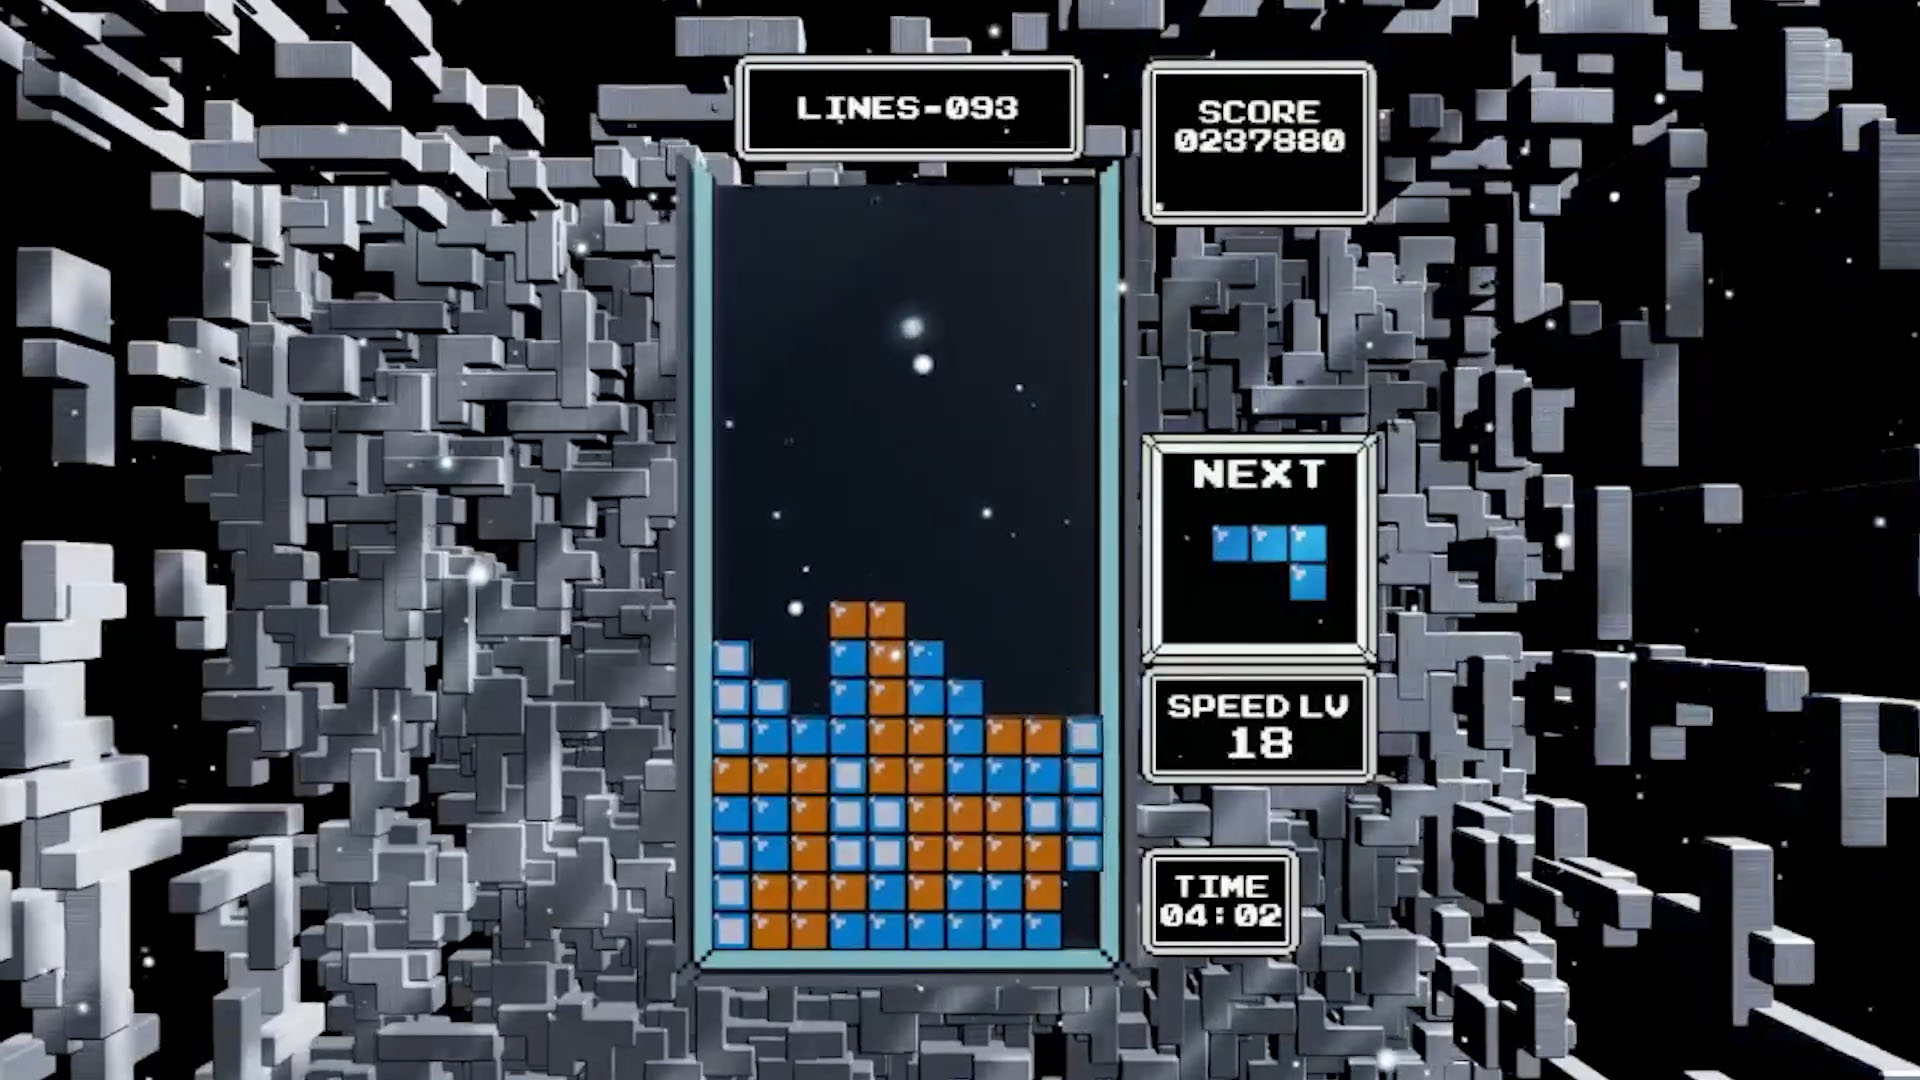 Tetris Effect: Connected Coming to PS5 with PS VR2 Compatibility on Feb.  22, 2023